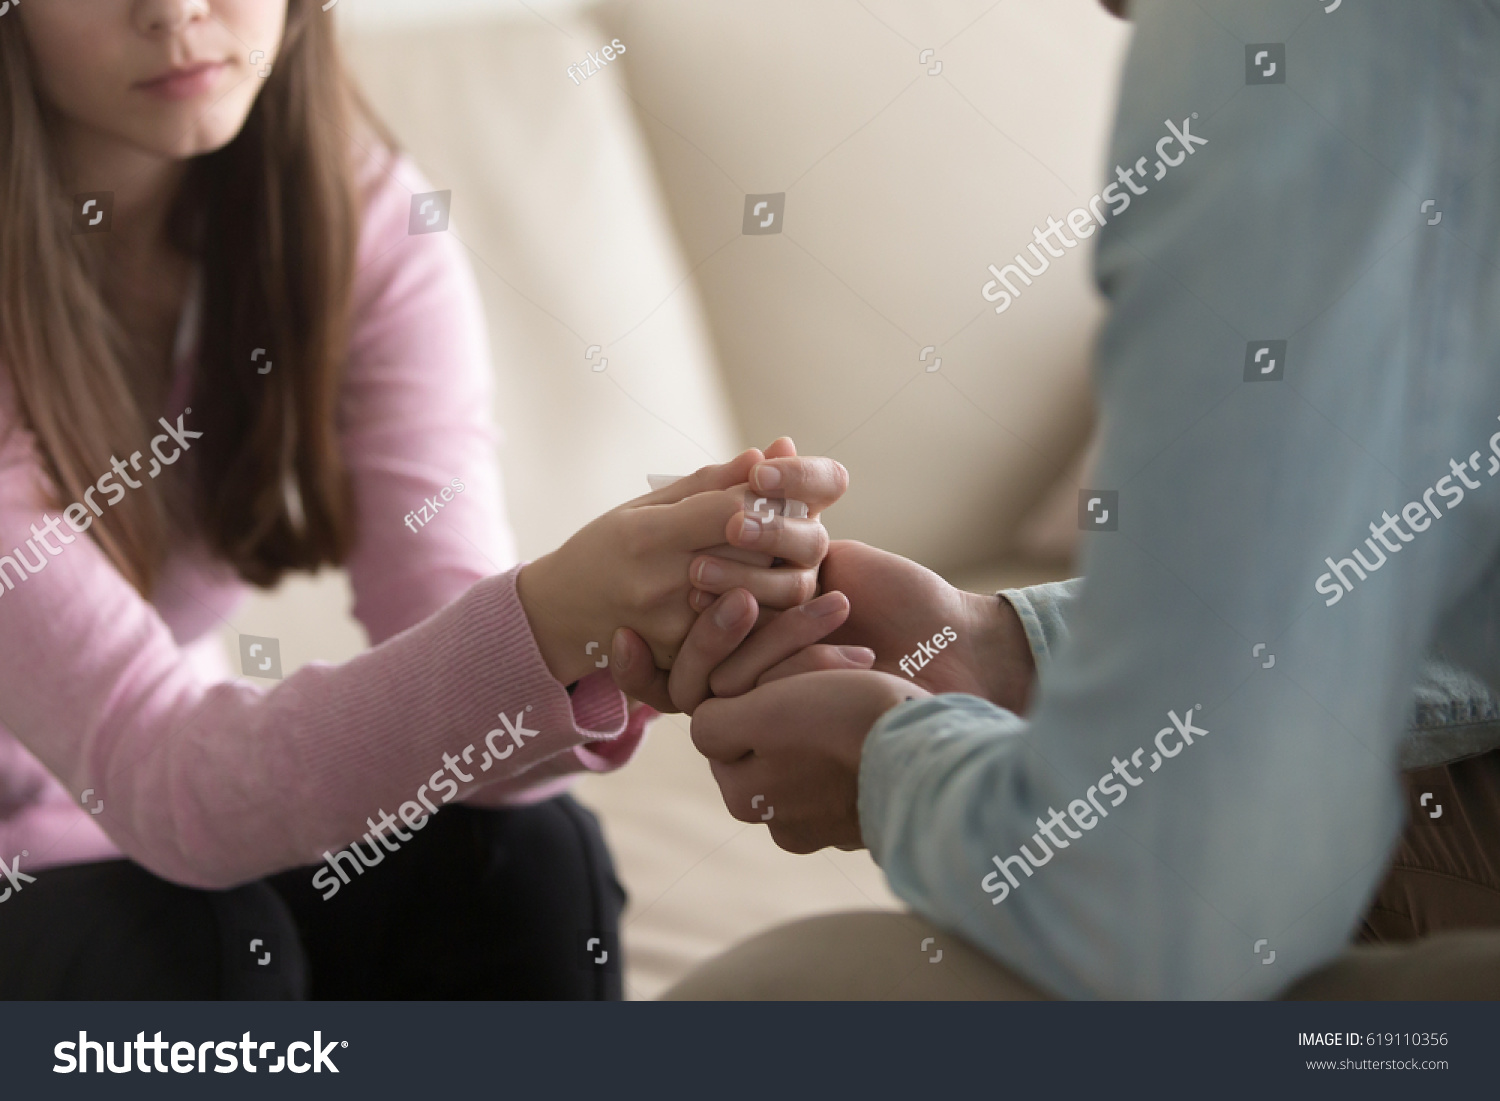 Close up view of upset couple, guy holding hands of crying woman, trying to comfort and console her, boyfriend apologizing offended lady, asking for forgiveness. Support, regret and compassion  #619110356